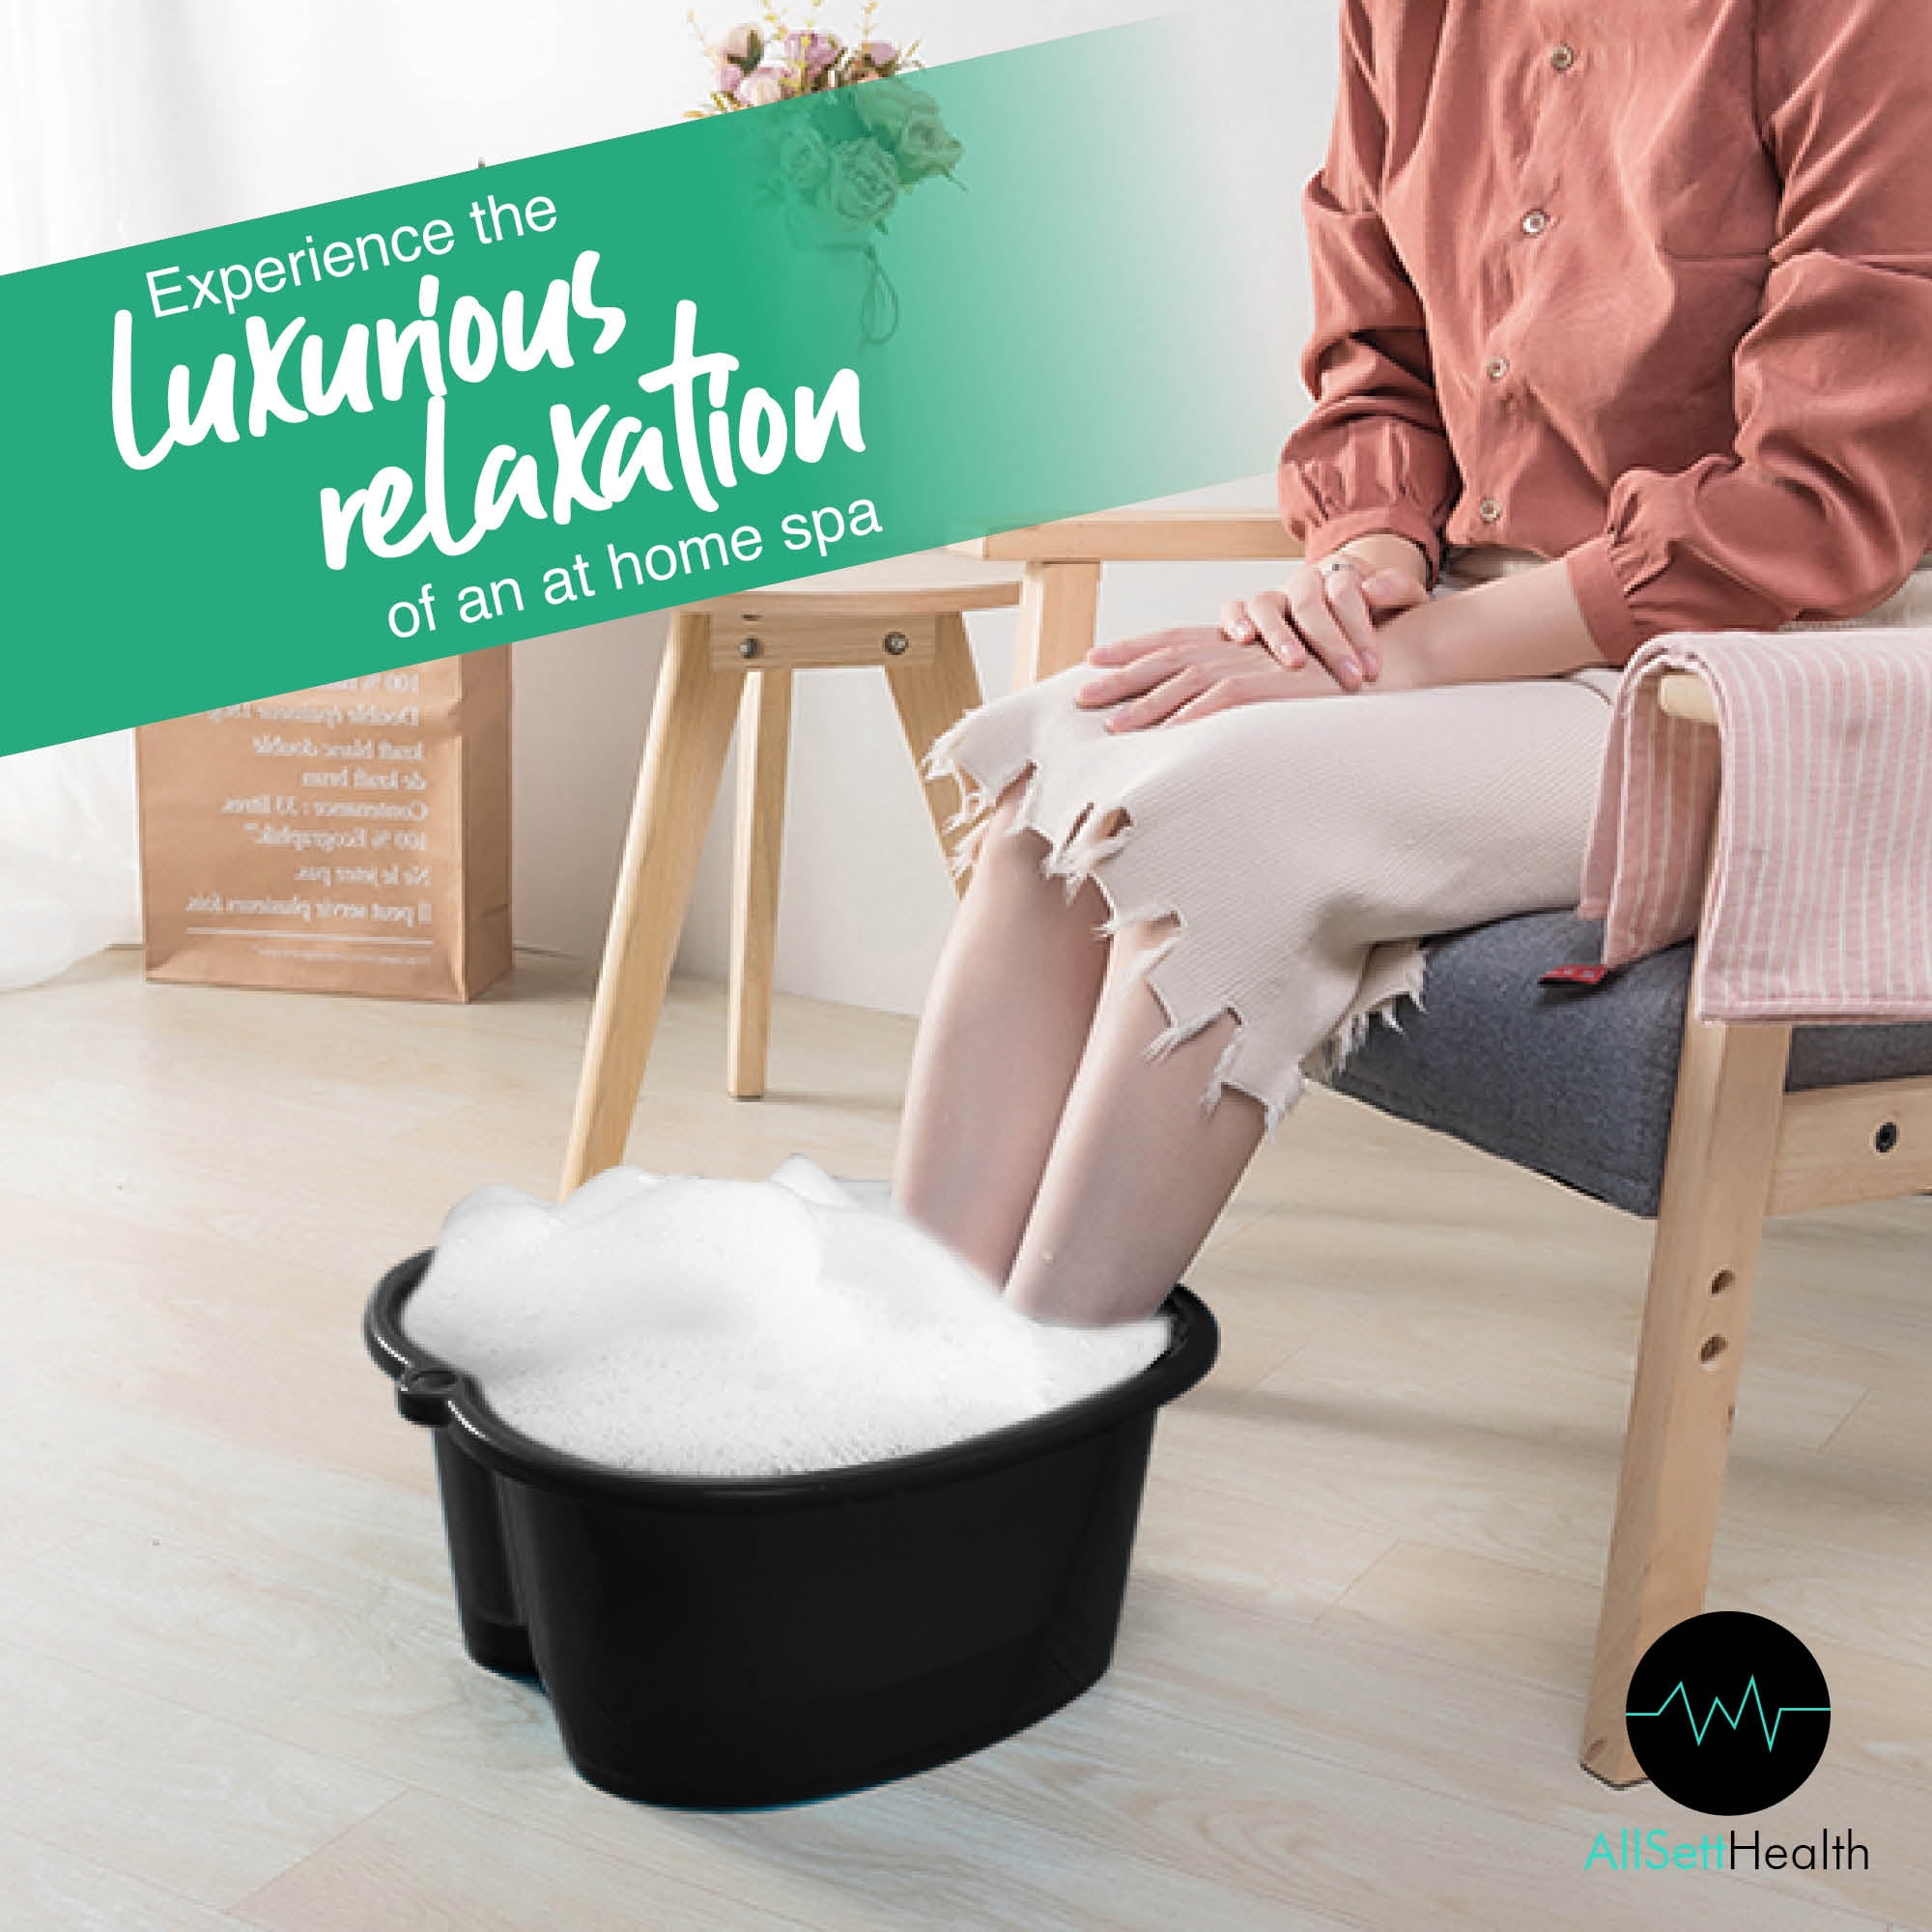 Foot Bath - Collapsible Foot Spa with Foot Massager rollers - Foot 